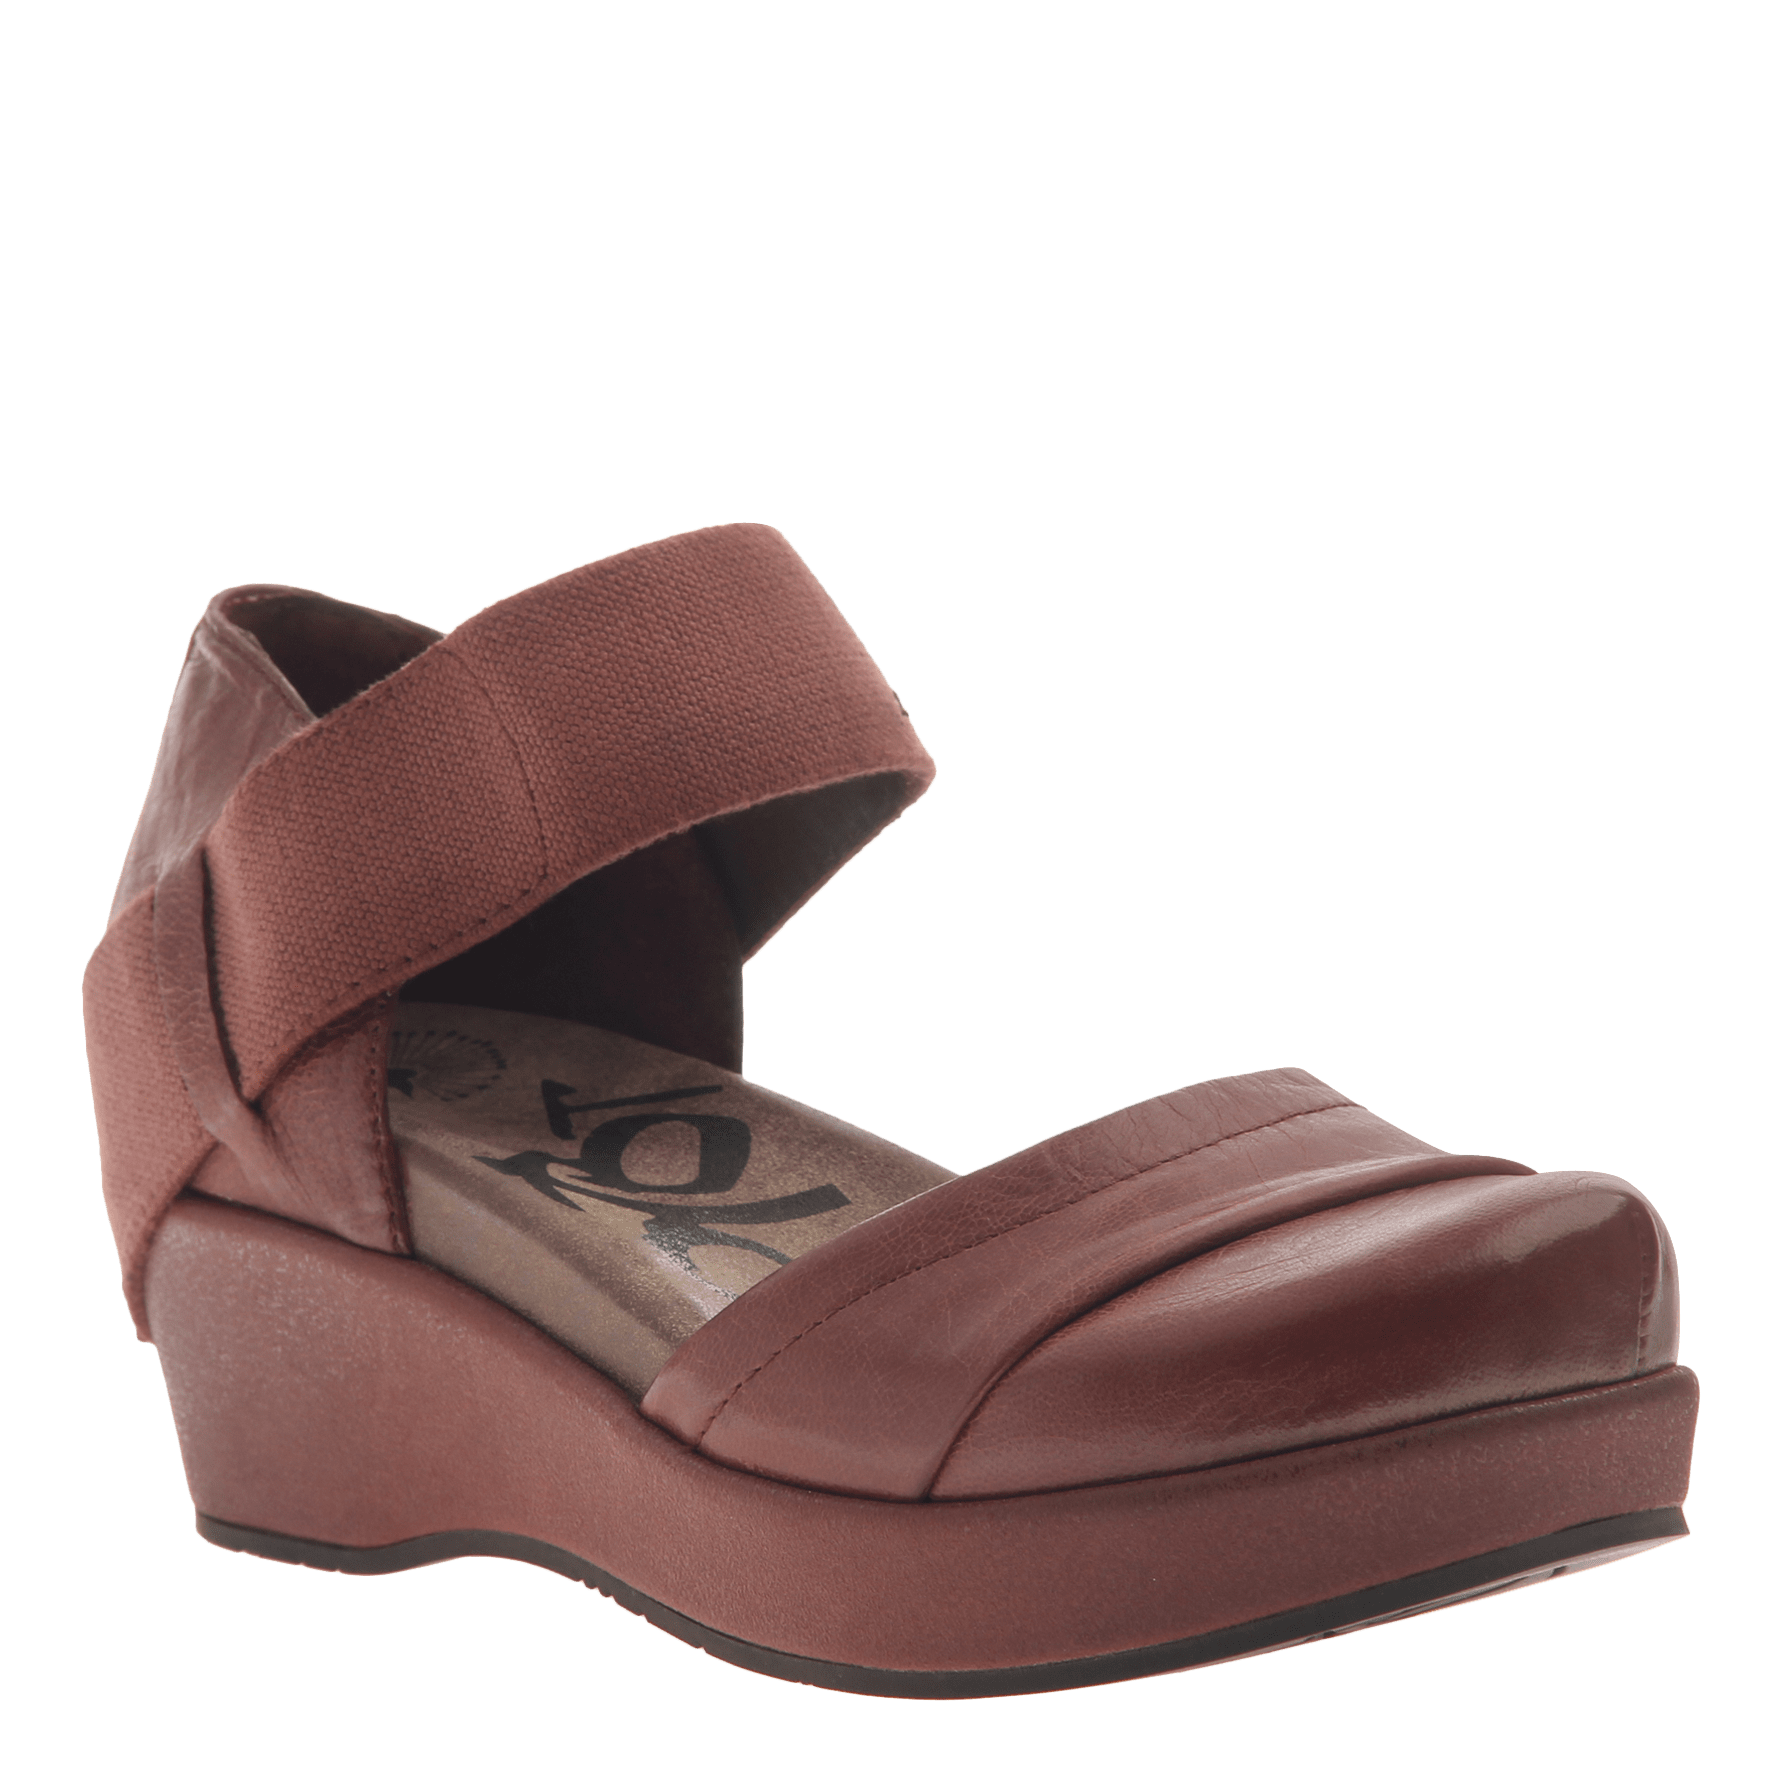 Women's Closed Toe Wedges | Comfortable 